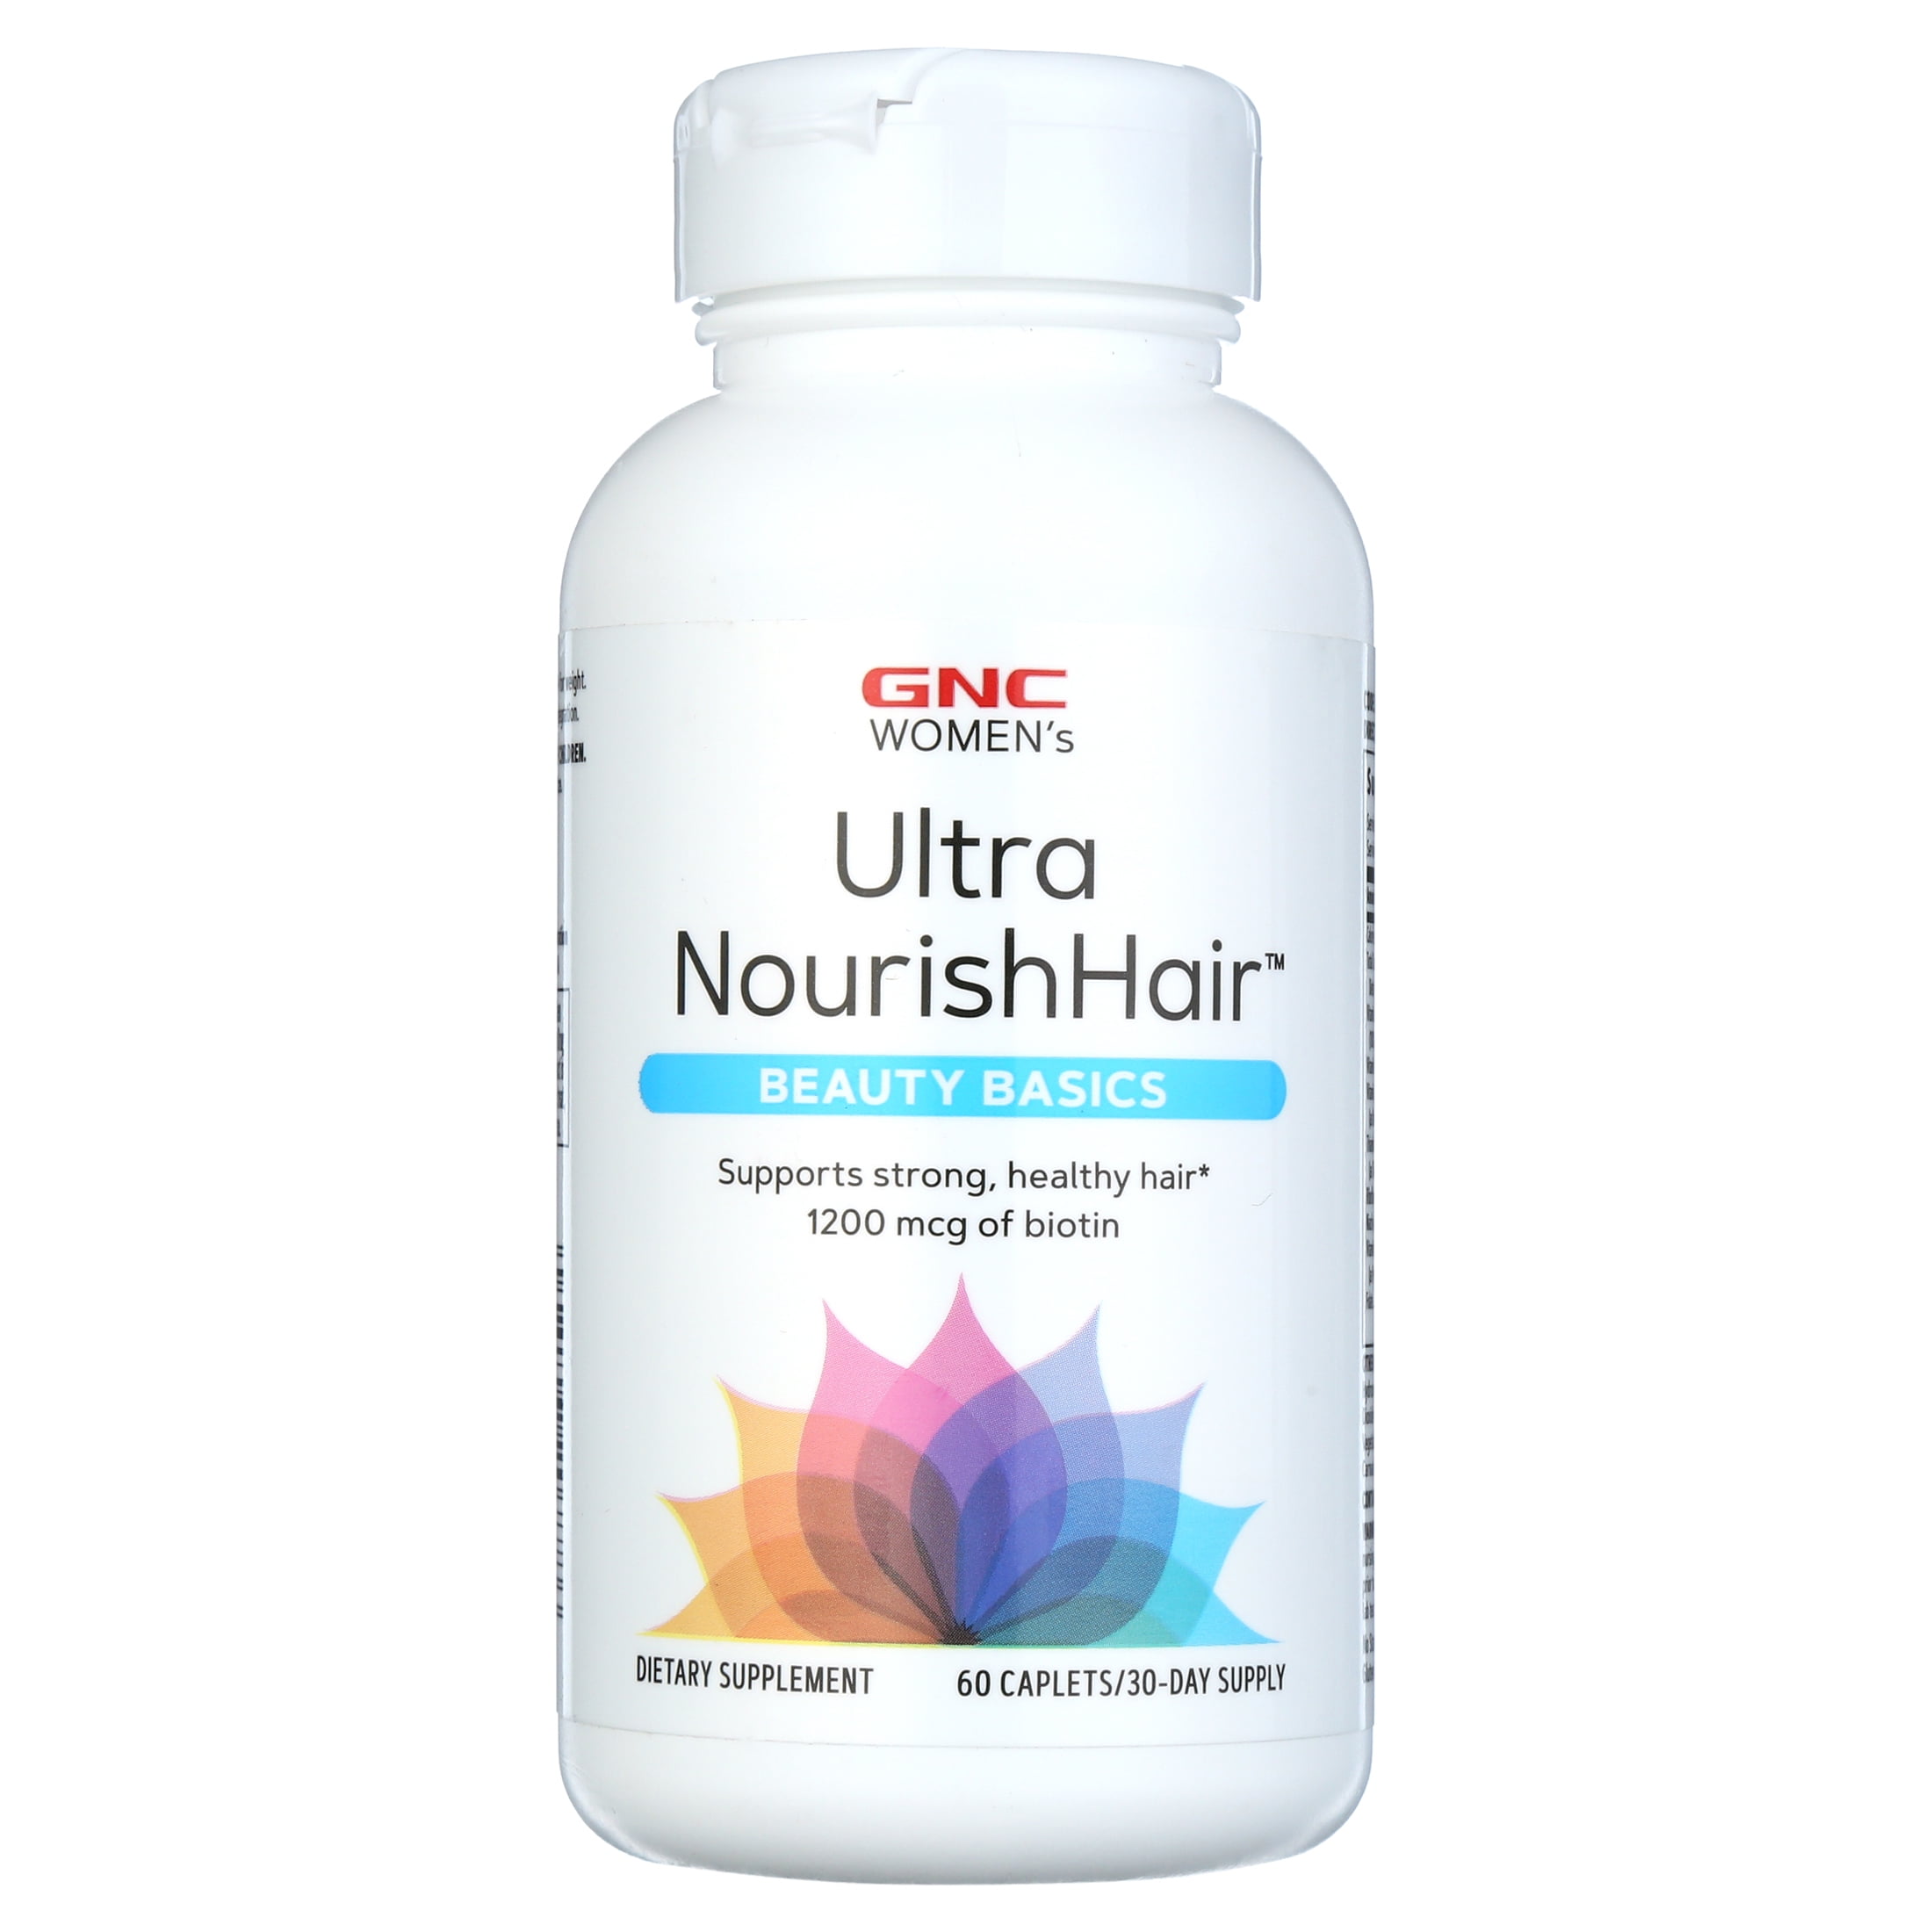 GNC ULTRA NOURISH HAIR, 60 Tablets, Support for Strong Healthy Hair with  1,200 mcg Biotin plus Vitamins and Minerals 